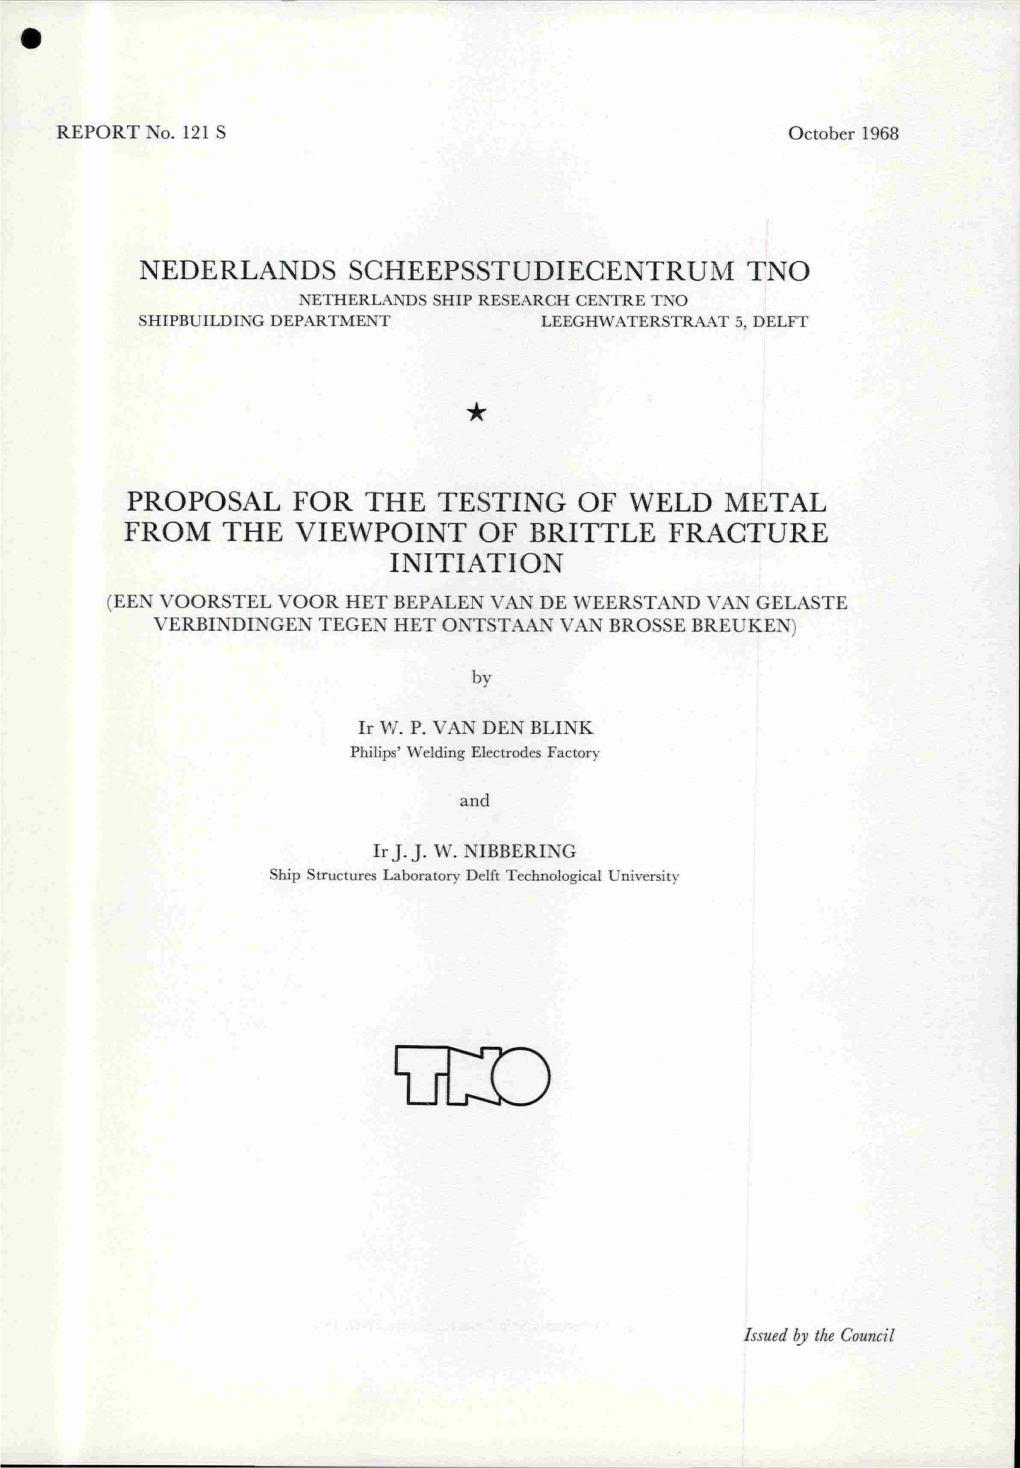 Proposal for the Testing of Weld Metal from The